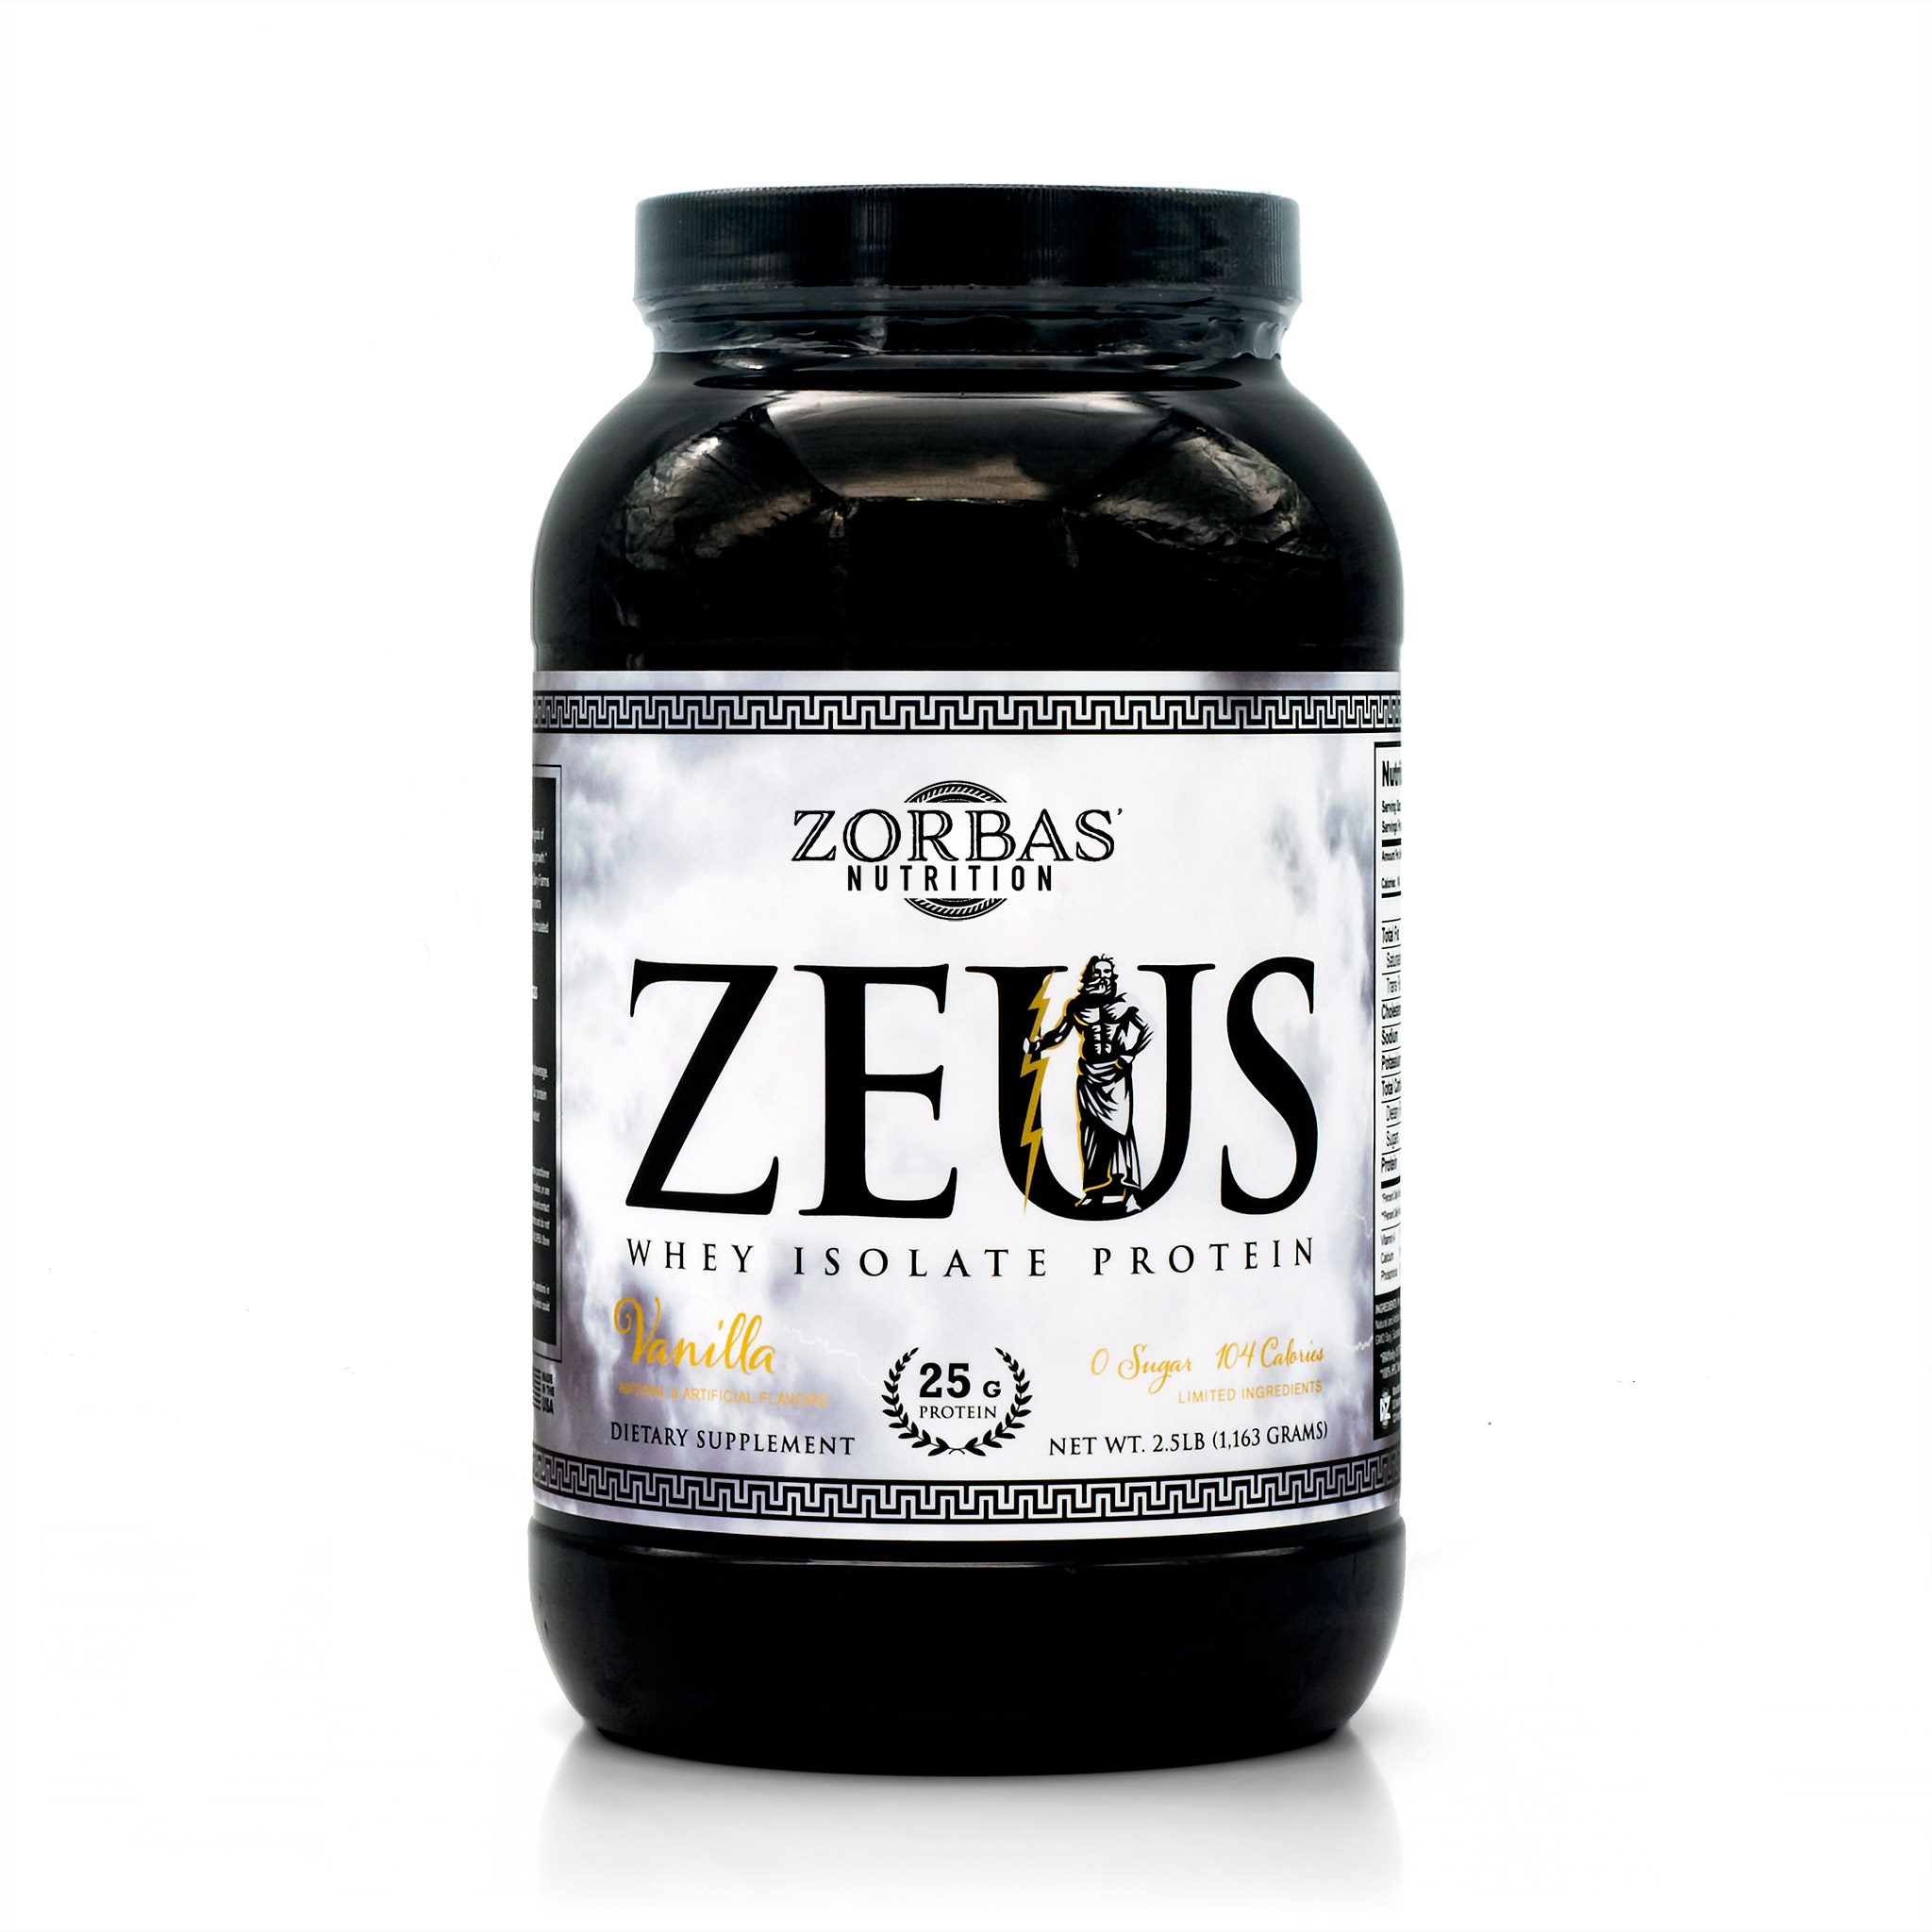 Zorbas Nutrition - Zeus whey isolate protein supplement